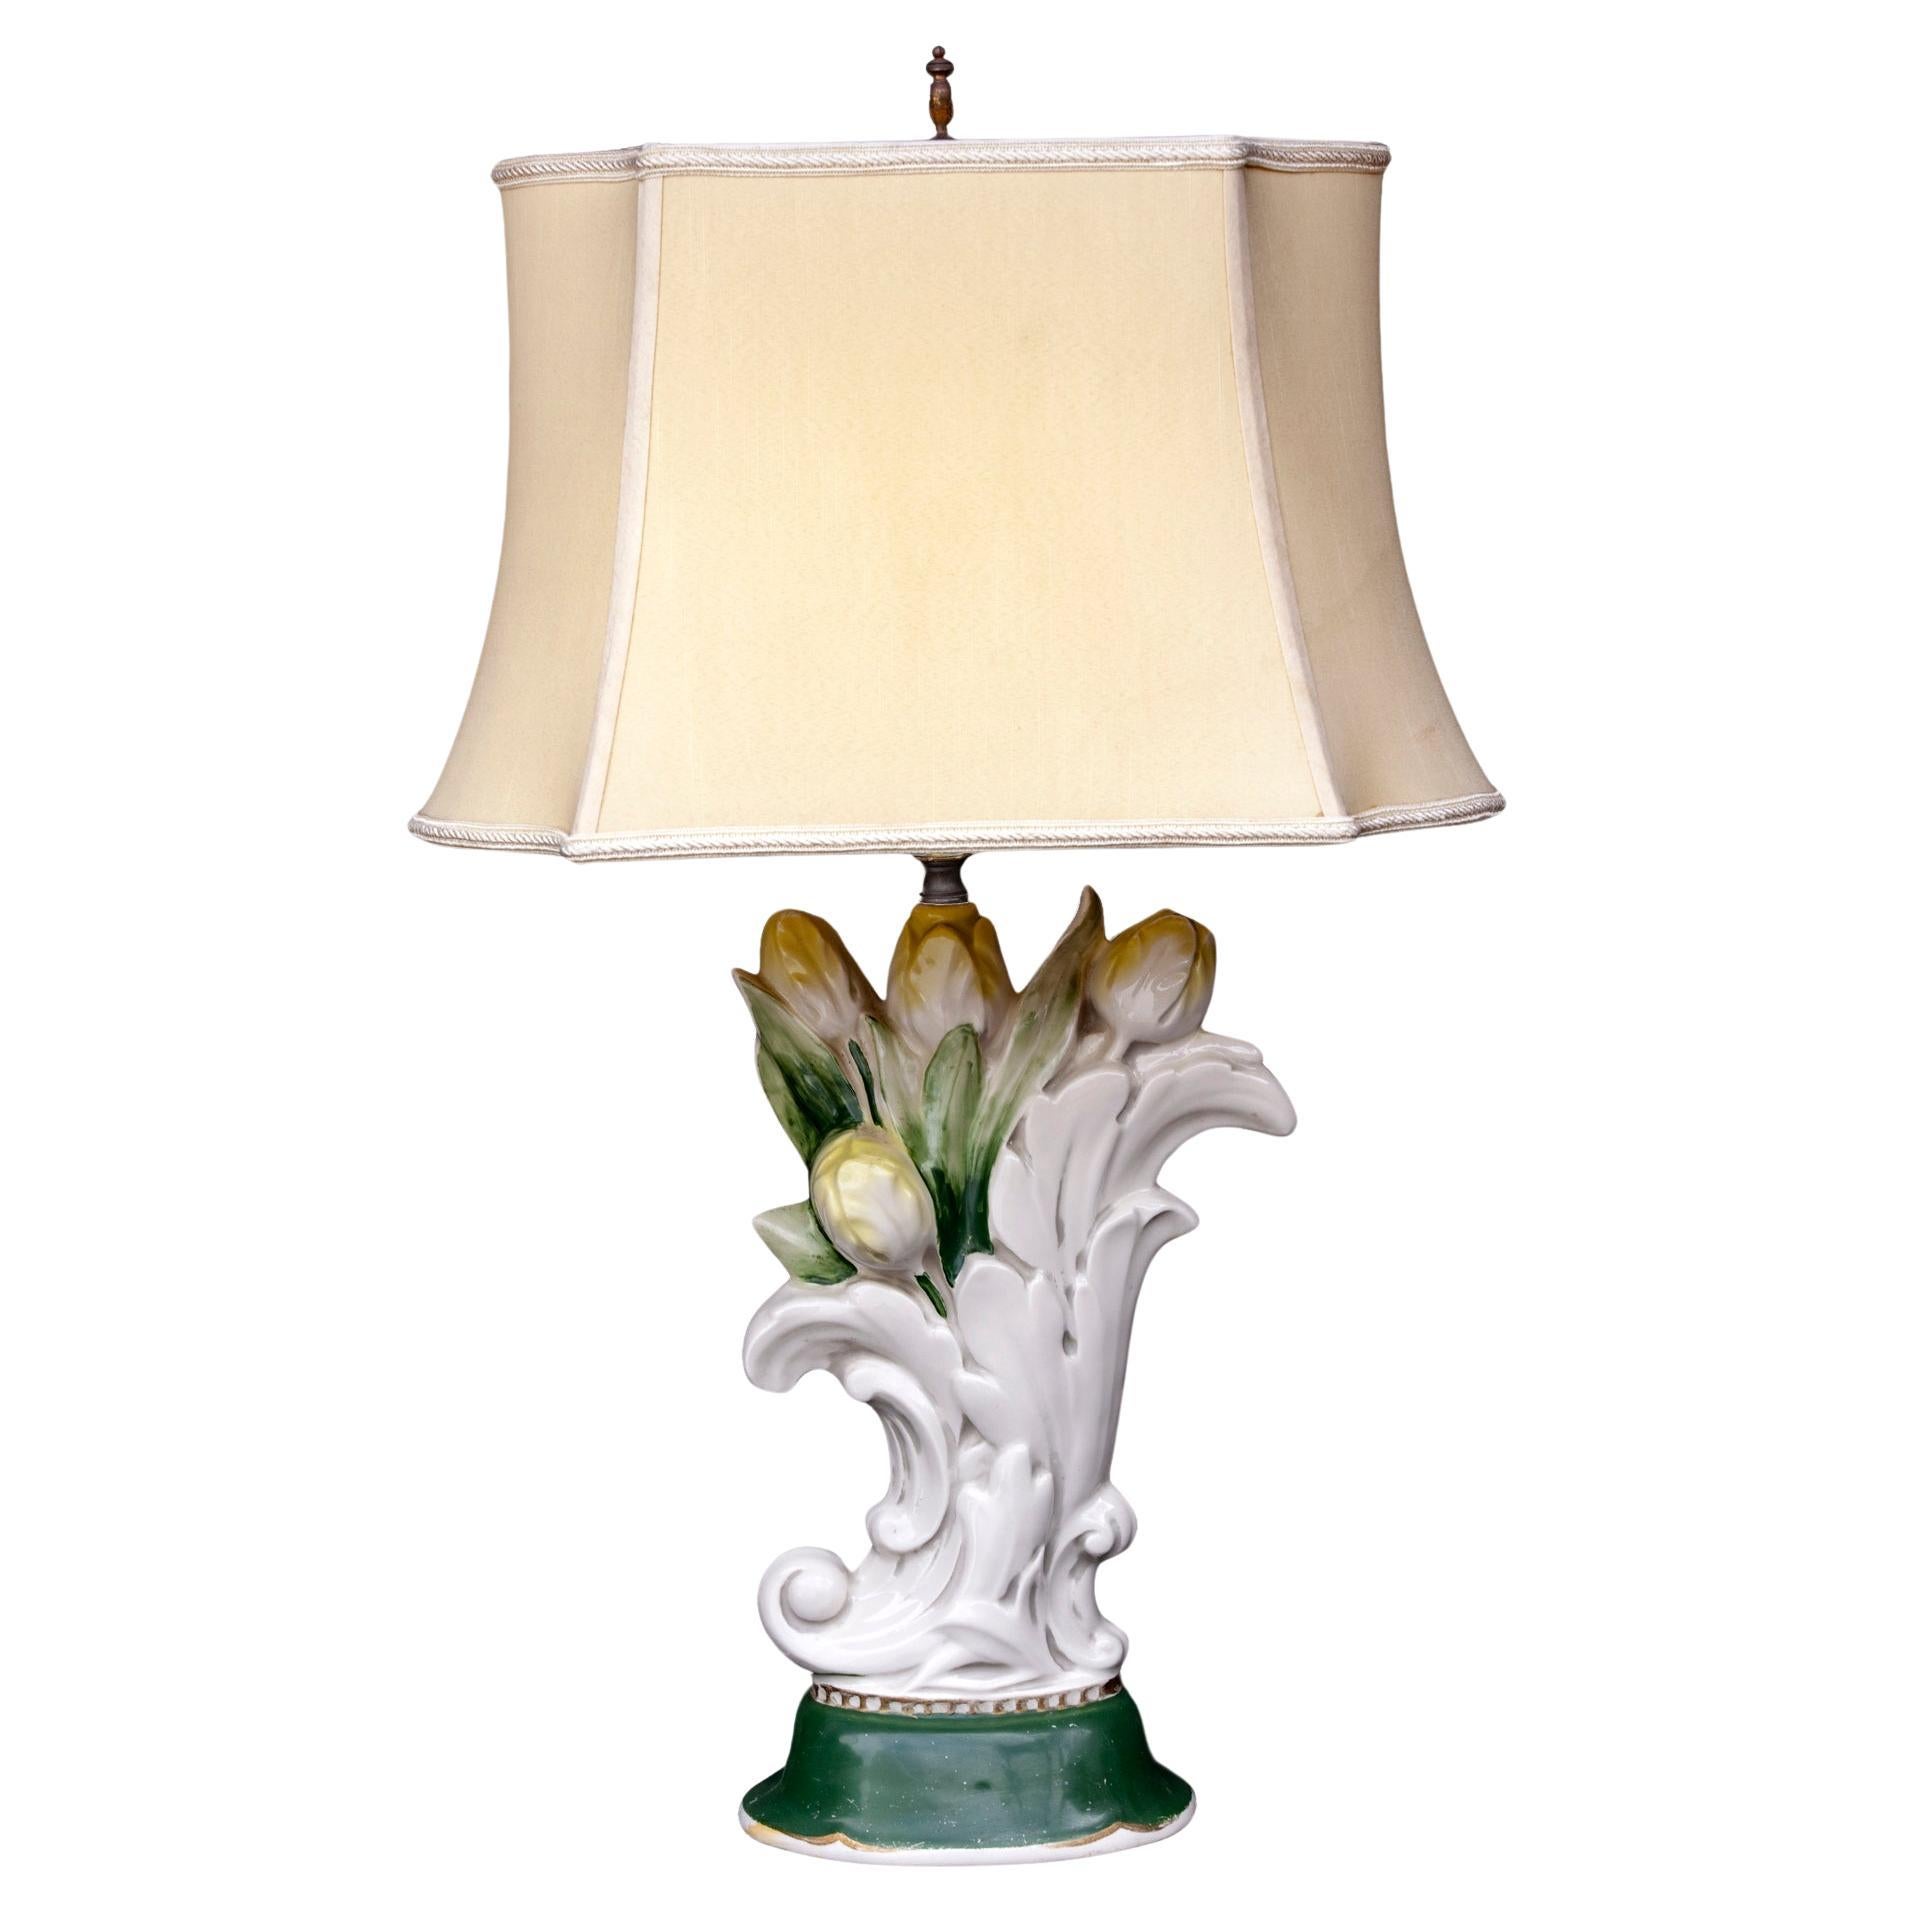 1940's Italian ceramic lamp with a cluster of flowering tulips with a pastel yellow glaze. The ombre leaves surround the tulips in an ornate white vessel which sits on a green base with a beaded rim. The bottom of the base is trimmed in gild over